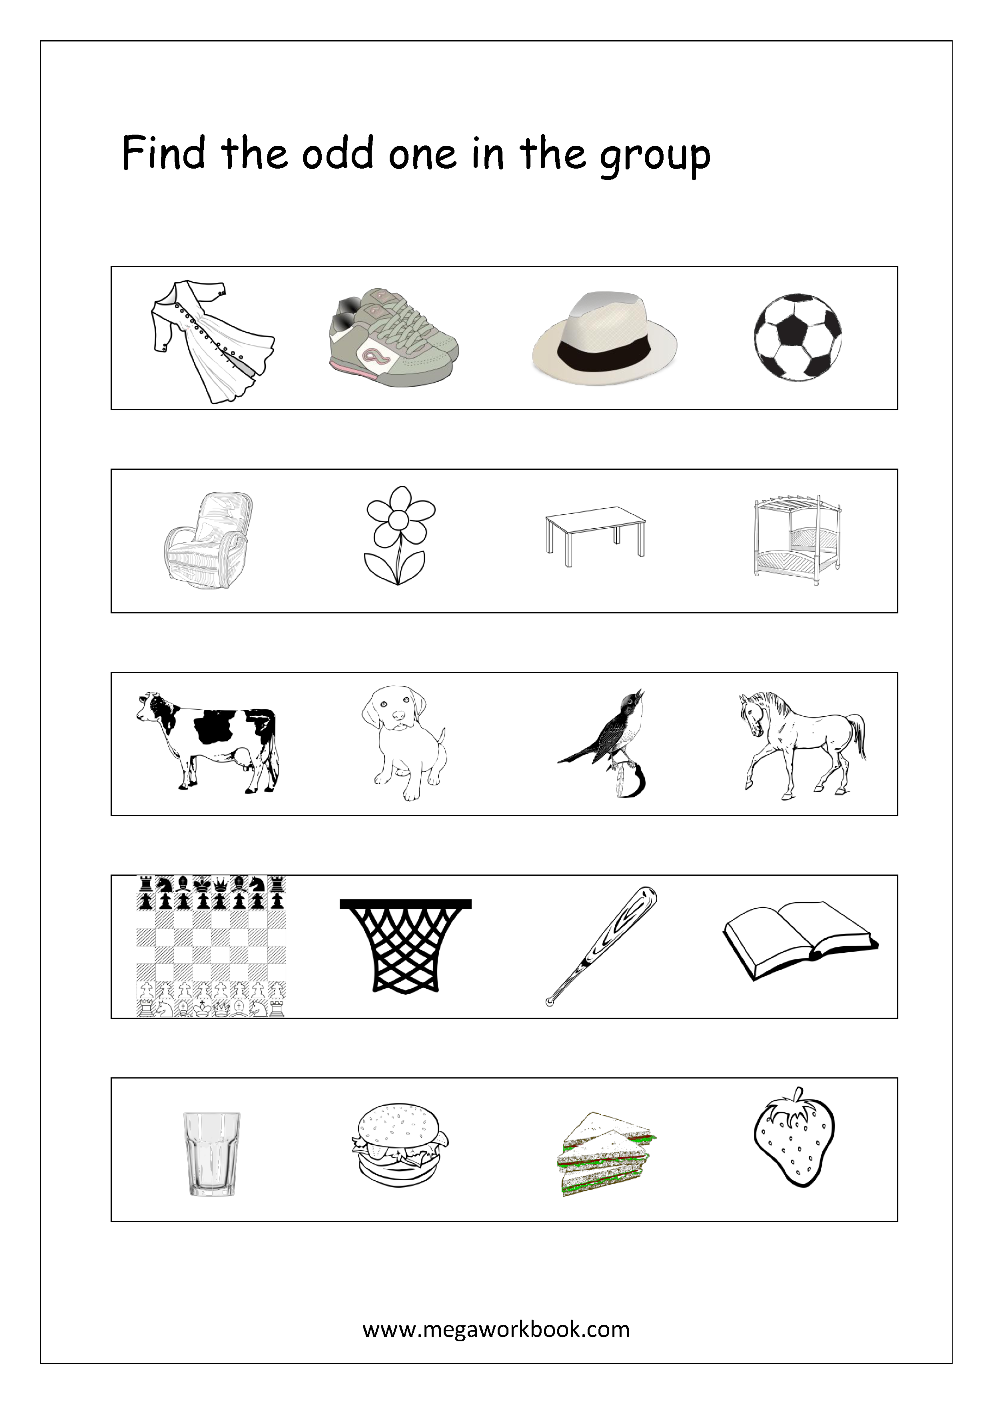 Free Printable Odd One Out Worksheets Logical Thinking